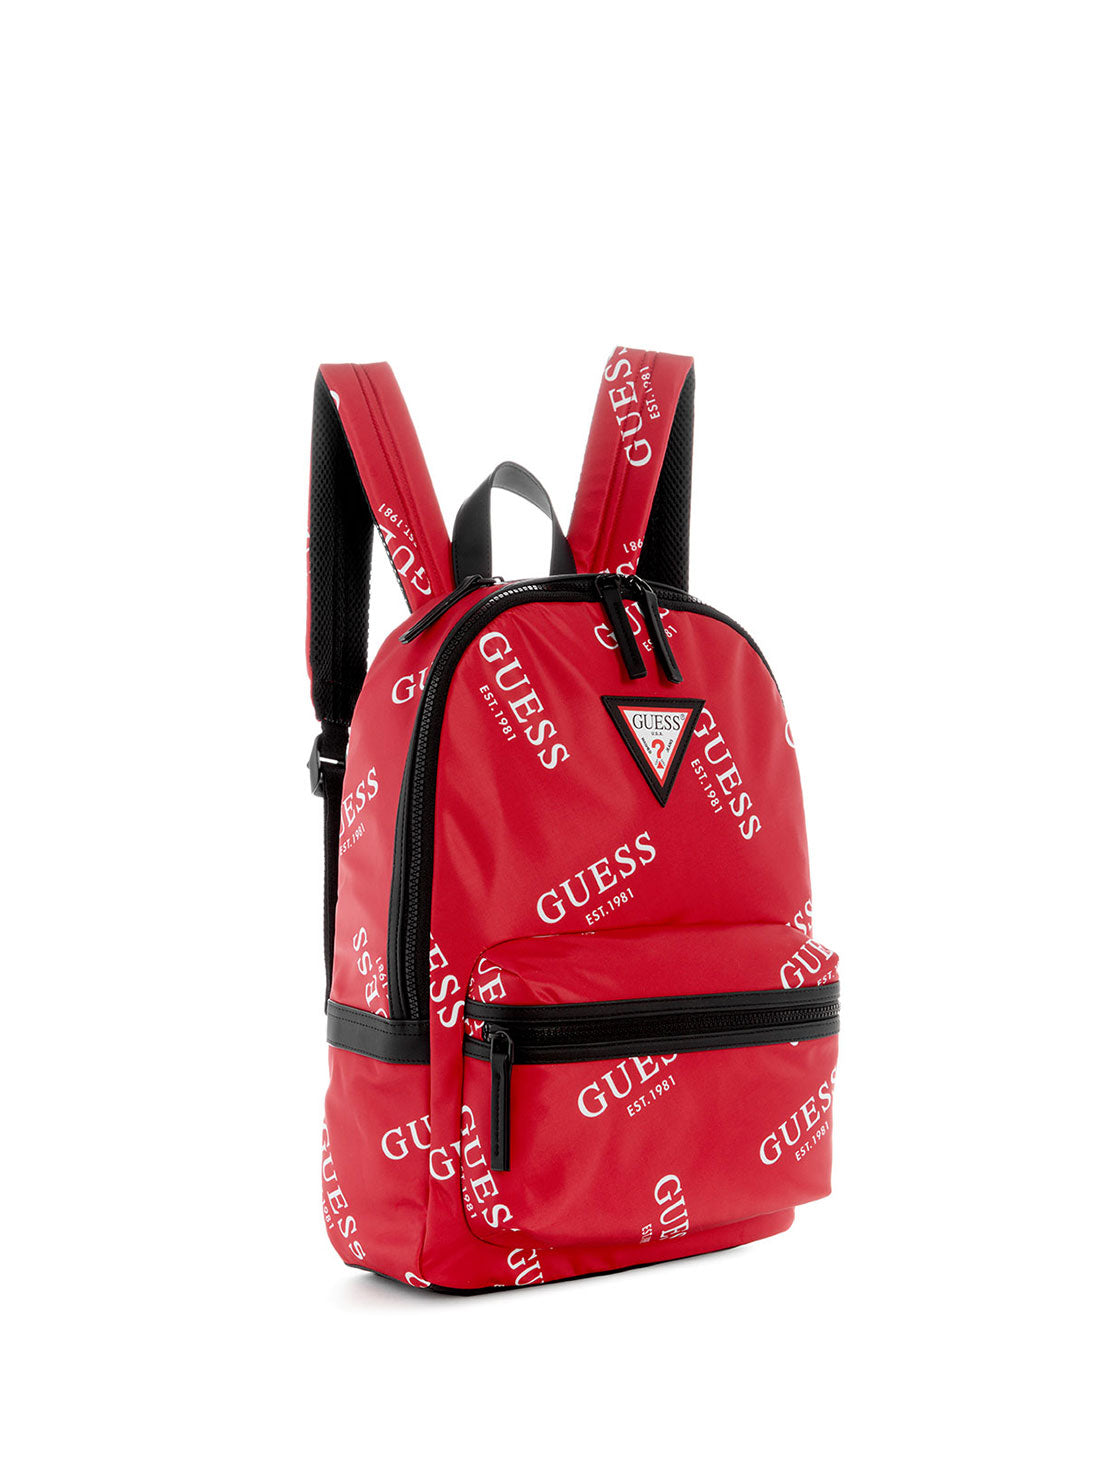 GUESS Men's Red Logo Originals Backpack TL703198 Front Side View